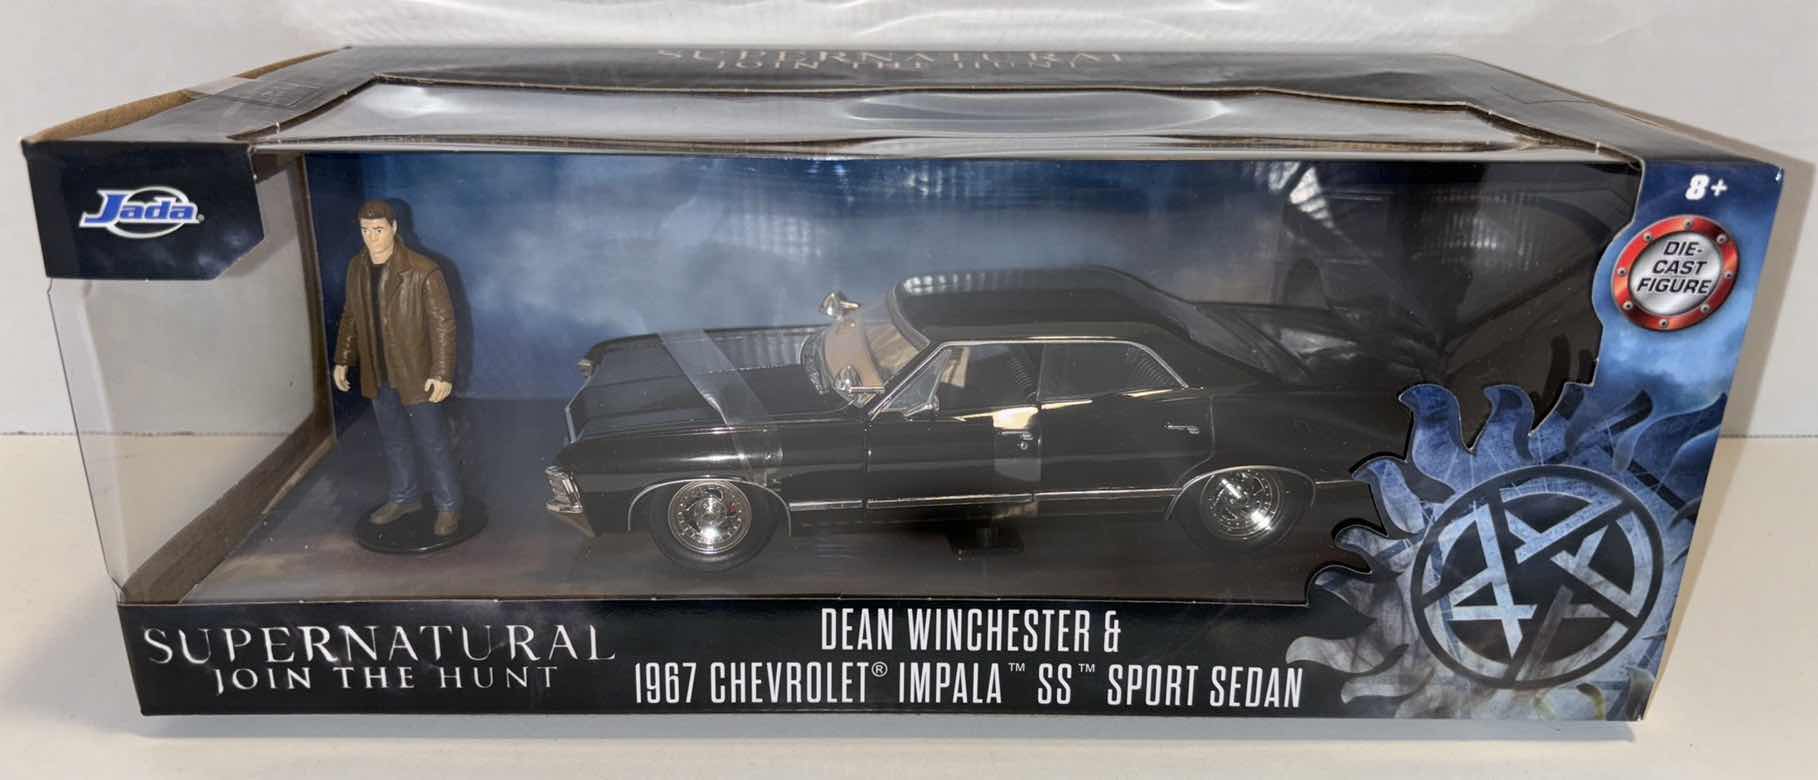 Photo 1 of NEW JADA TOYS HOLLYWOOD RIDES FIGURE & DIE-CAST VEHICLE, SUPERNATURAL JOIN THE HUNT “DEAN WINCHESTER & 1967 CHEVROLET IMPALA SS SPORT SEDAN”